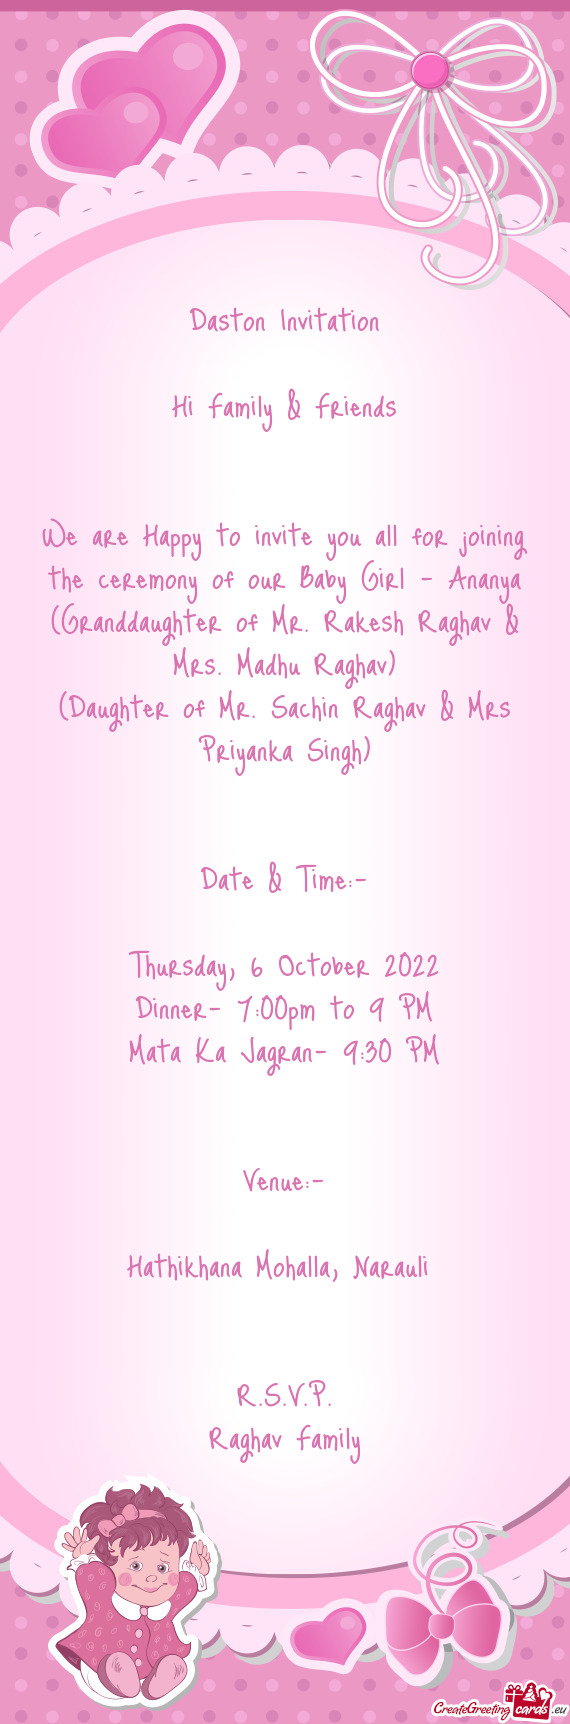 We are Happy to invite you all for joining the ceremony of our Baby Girl - Ananya